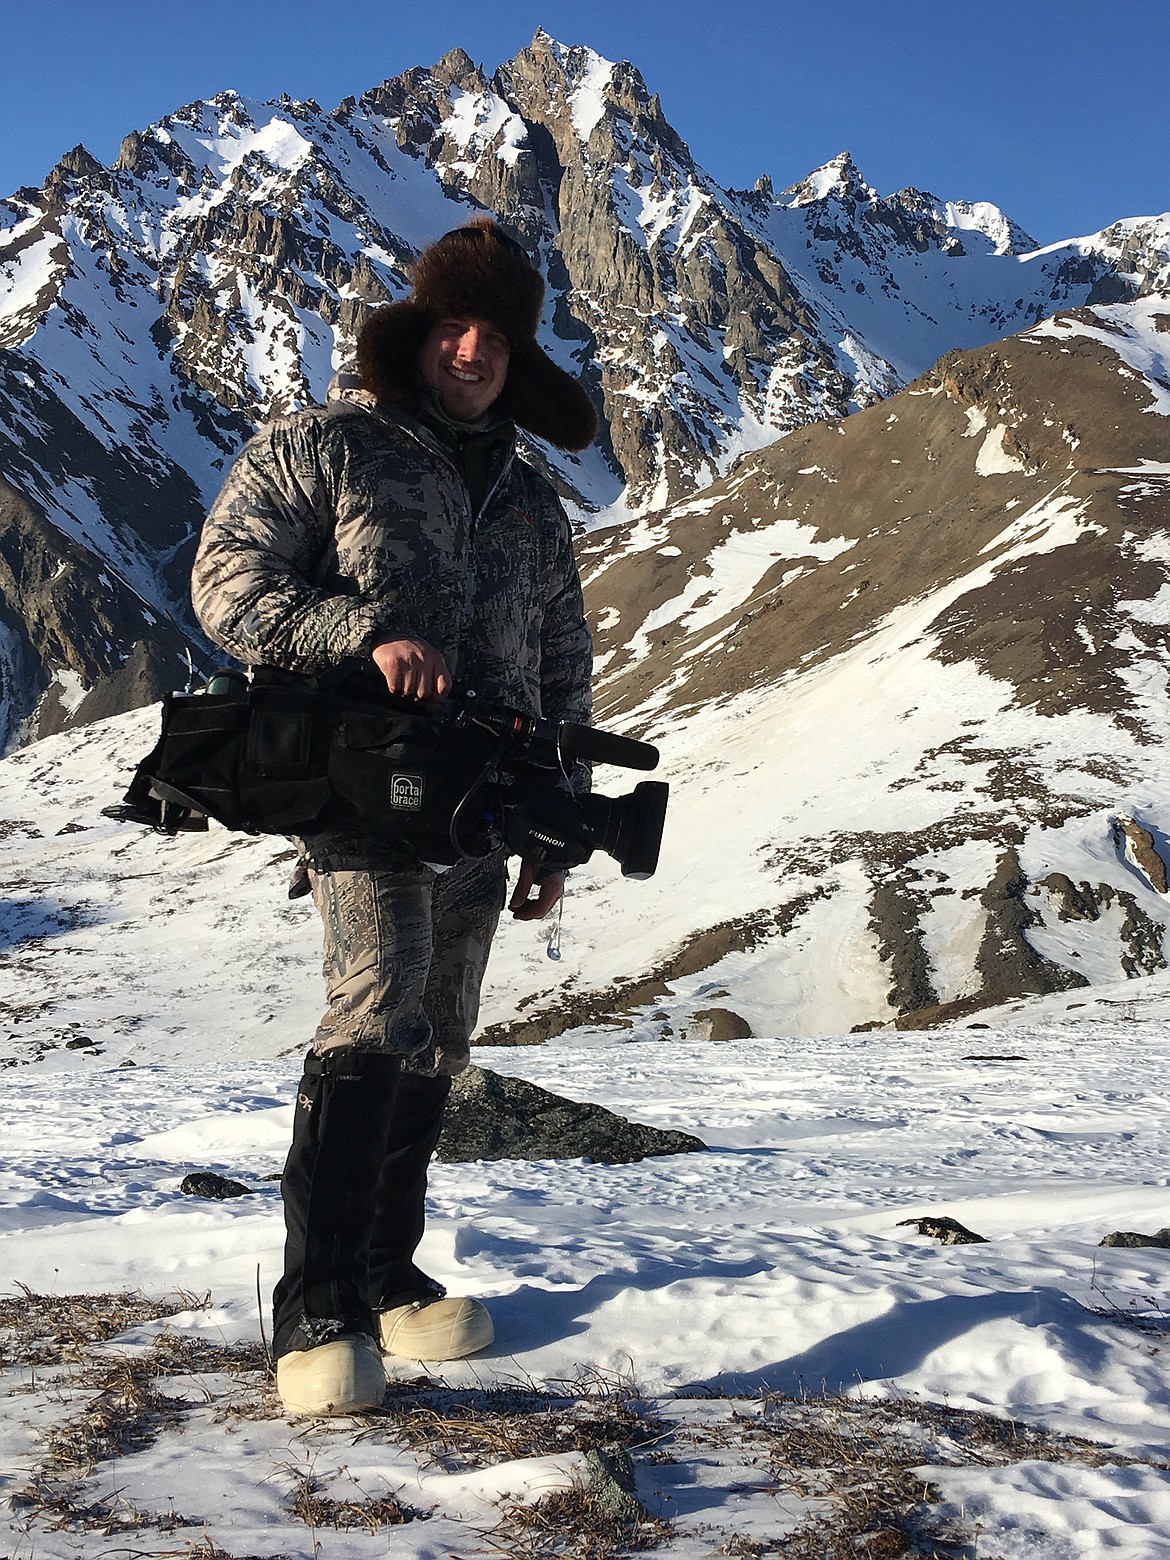 Mason Gertz has traveled the world working as a cameraman and field producer, including spending time in the Alaskan wilderness filming "Mountain Men."